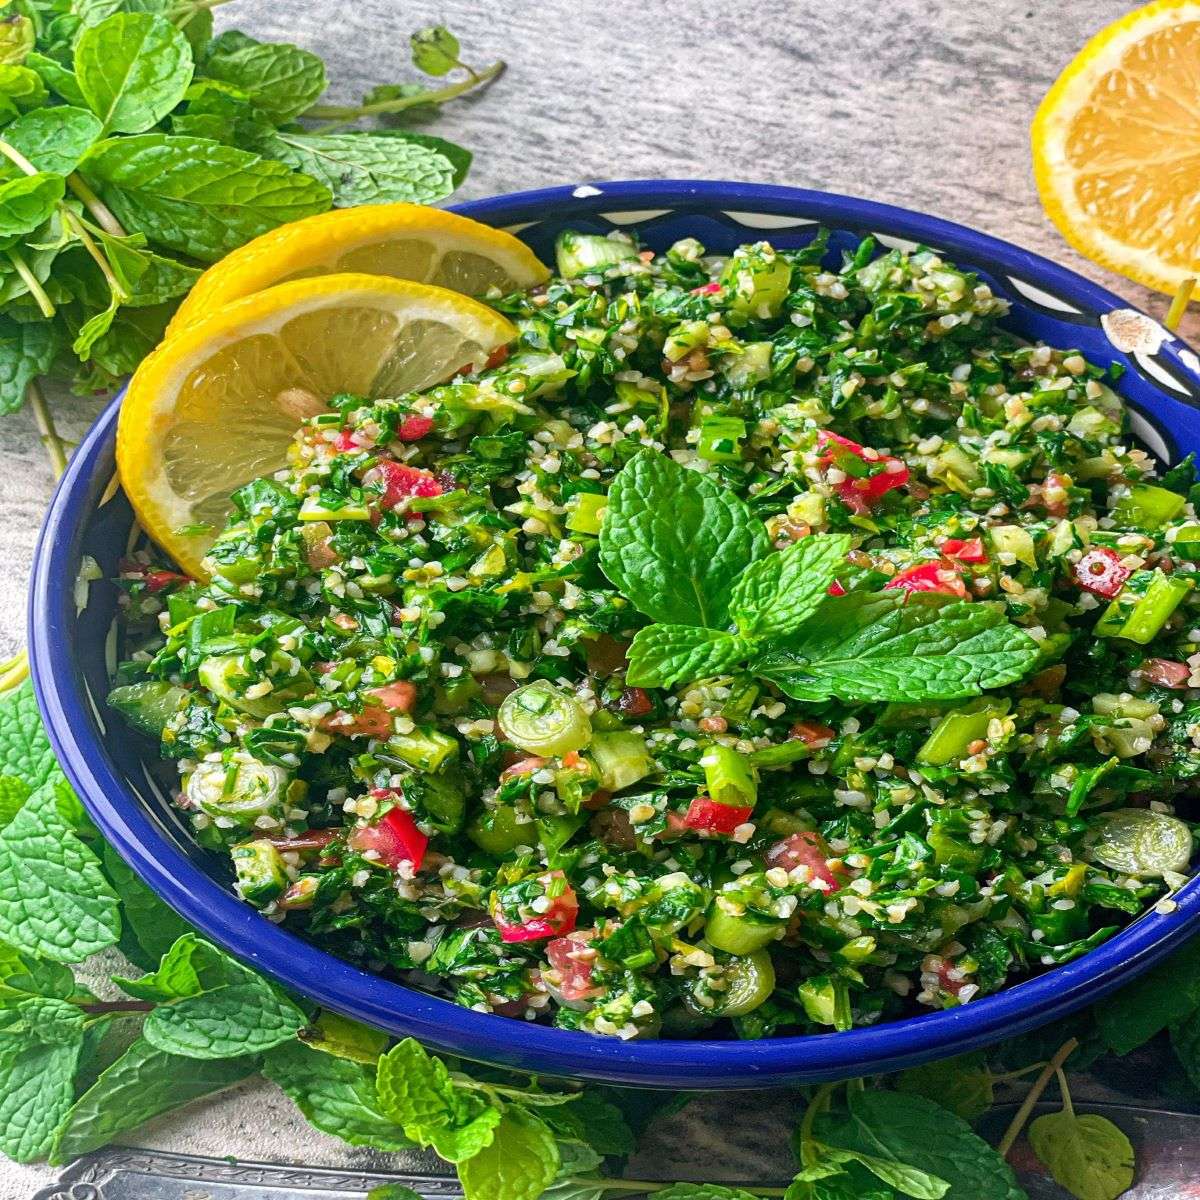 A delicious bowl of tabouli salad made of fresh parsley, burgul, and other ingredients. It is decorated with mint leaves and lemon slices.